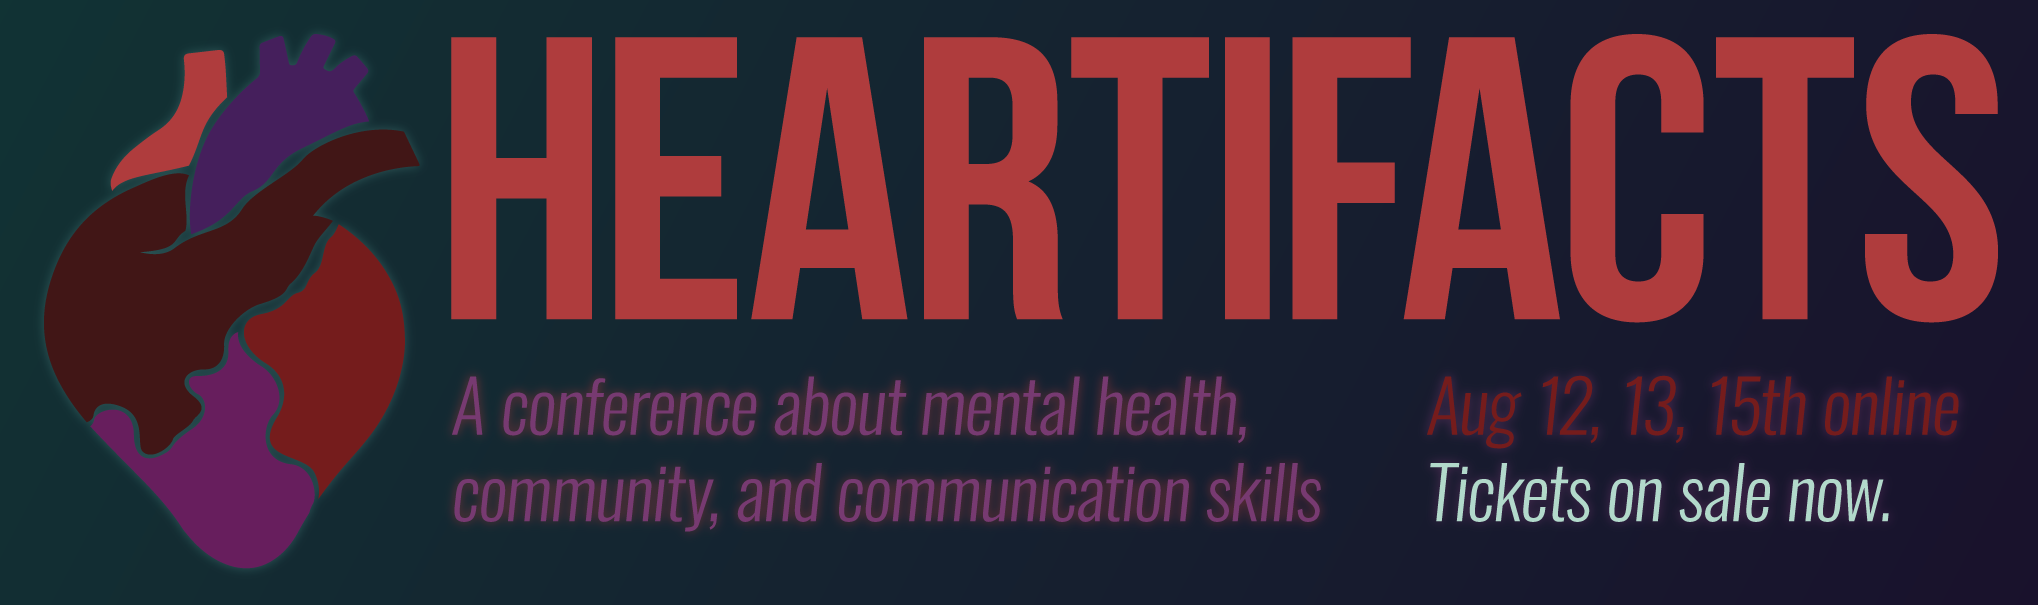 Heartifacts 2020 – mental health and community building for software pros – August 12-15, 2020